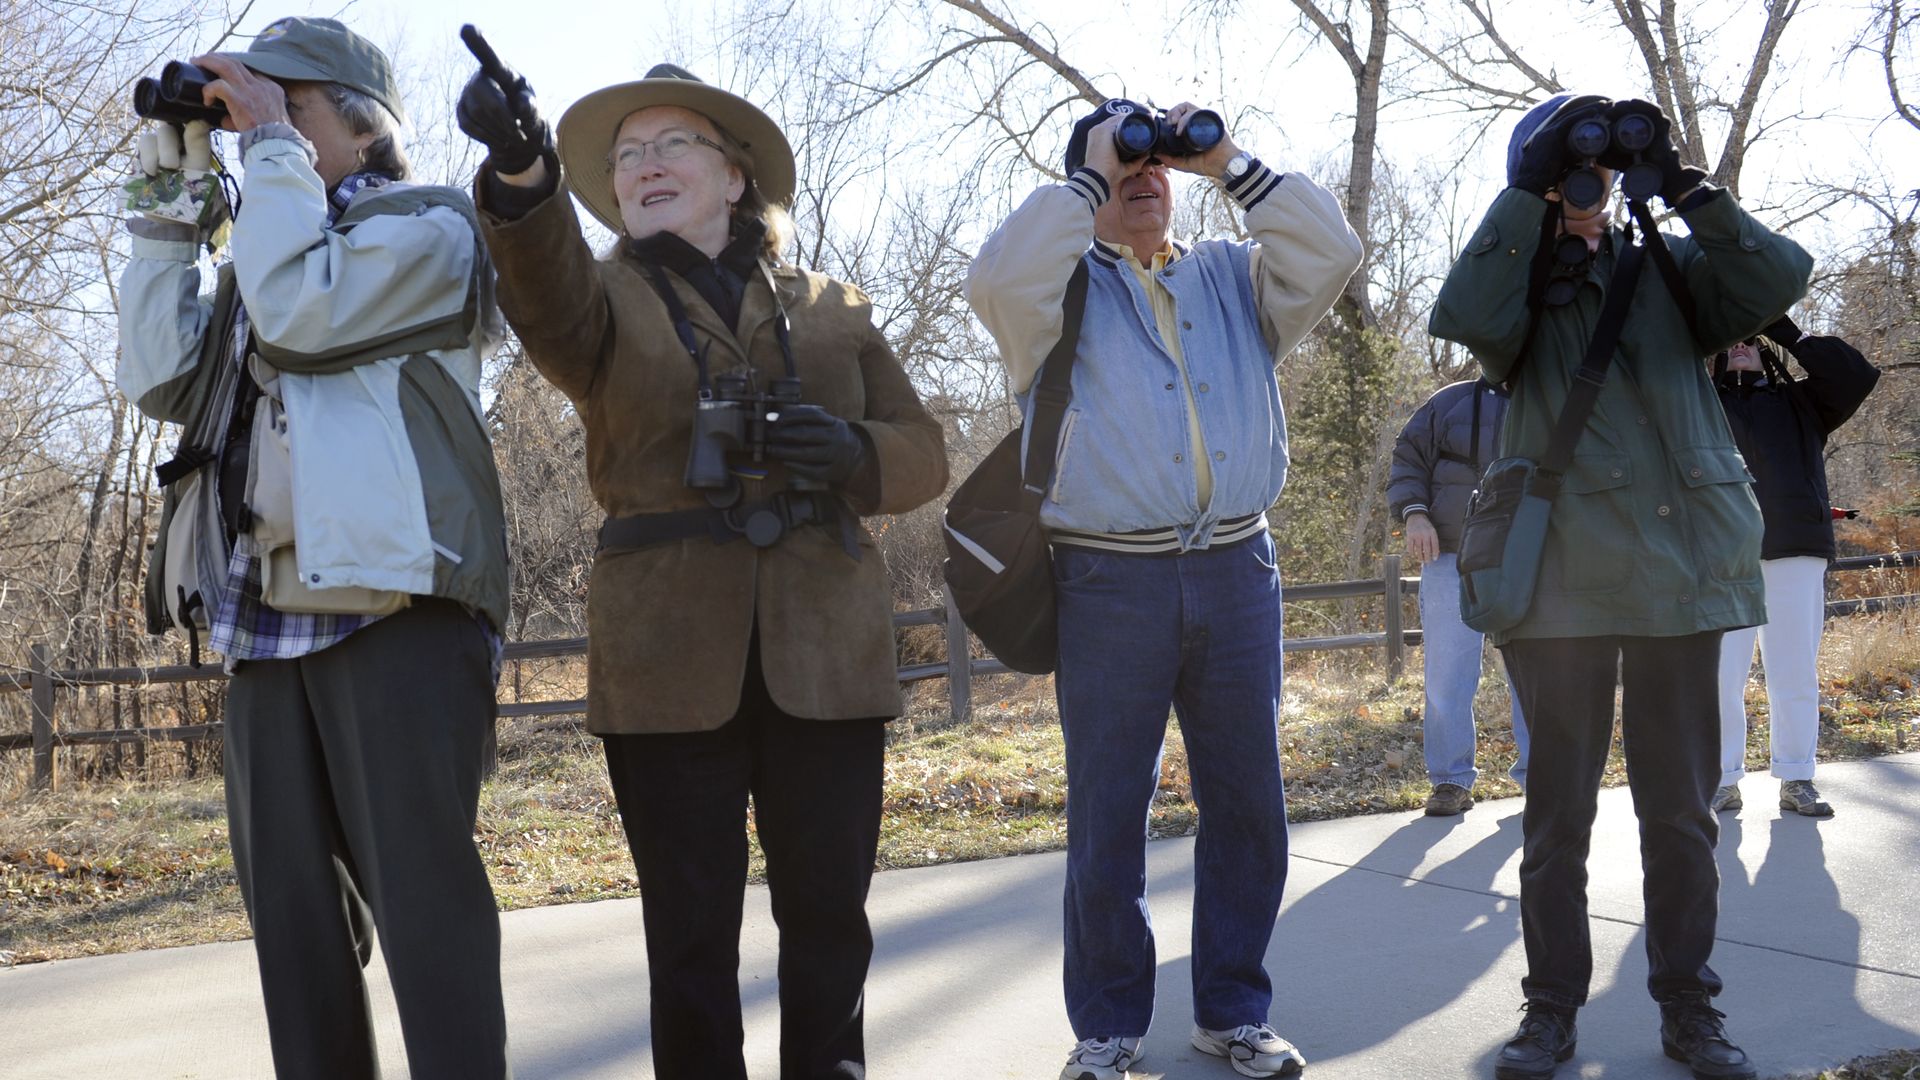 People at Anderson Park in Wheat Ridge search for birds during the annual Audubon Society of Greater Denver "Christmas Bird Count." Photo: Kathryn Scott/The Denver Post via Getty Images